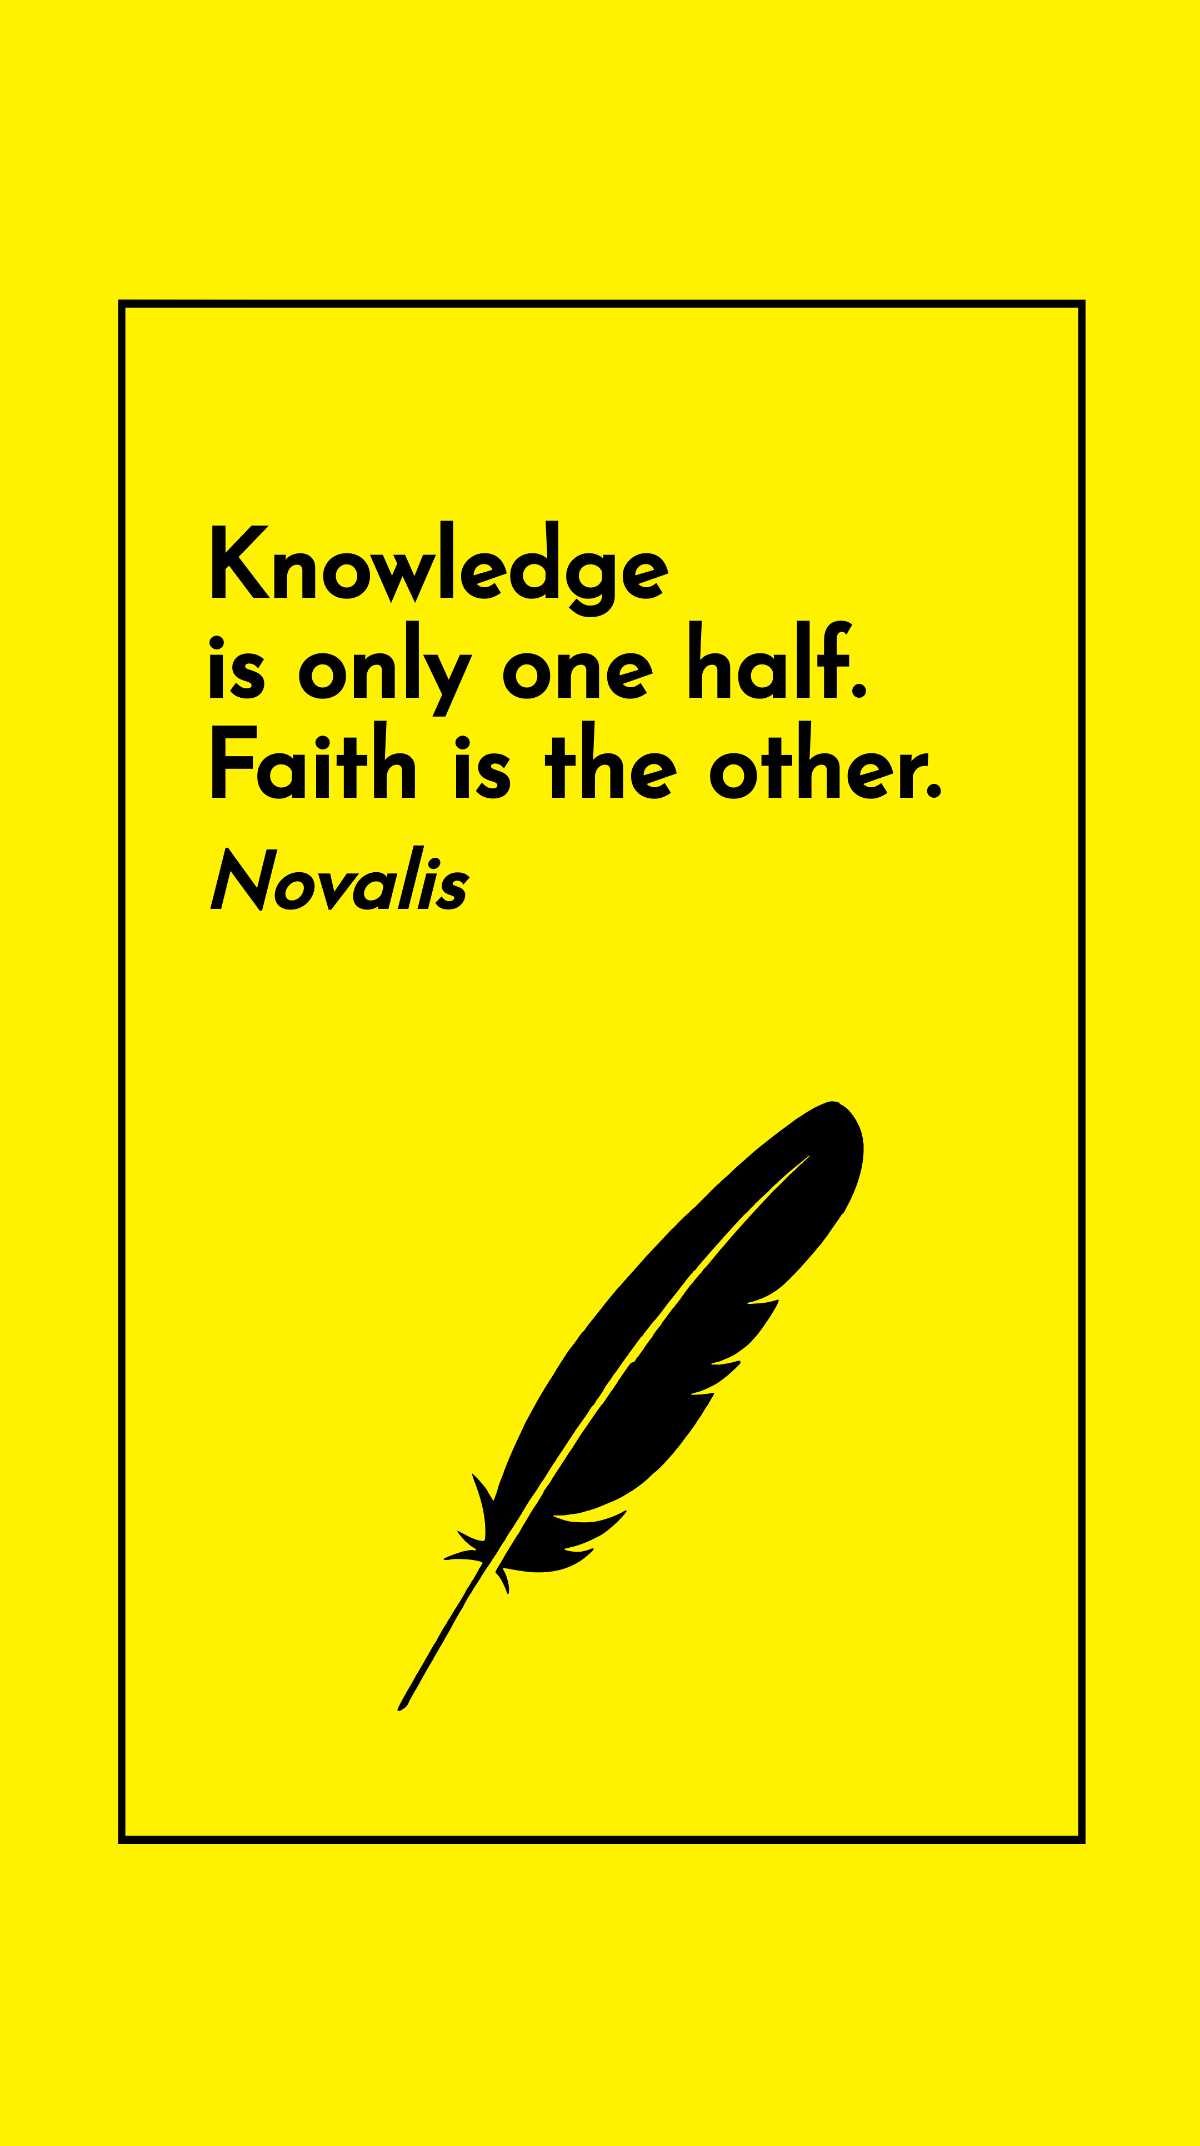 Novalis - Knowledge is only one half. Faith is the other.